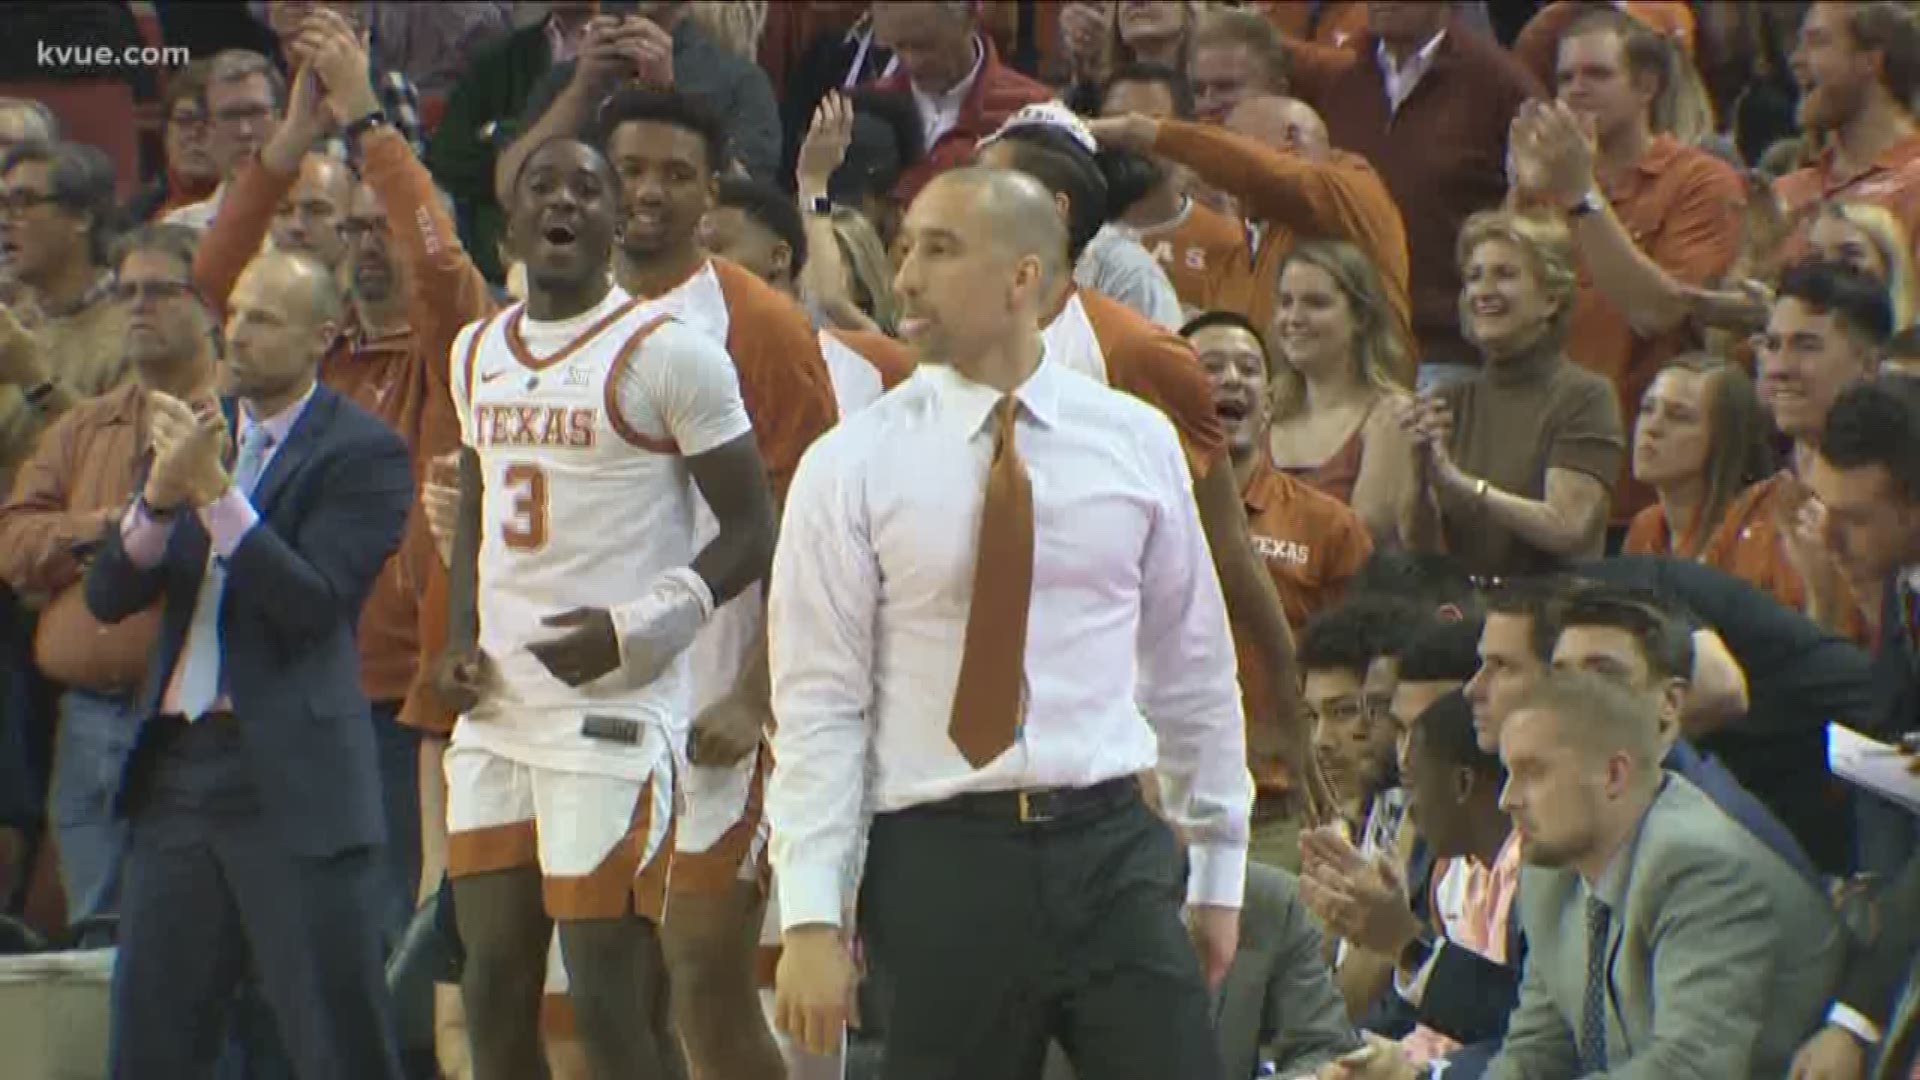 The Texas Longhorns Men's Basketball team starts practice tomorrow as they prepare to build on the 2019 season, where they finished as the NIT tournament champions.